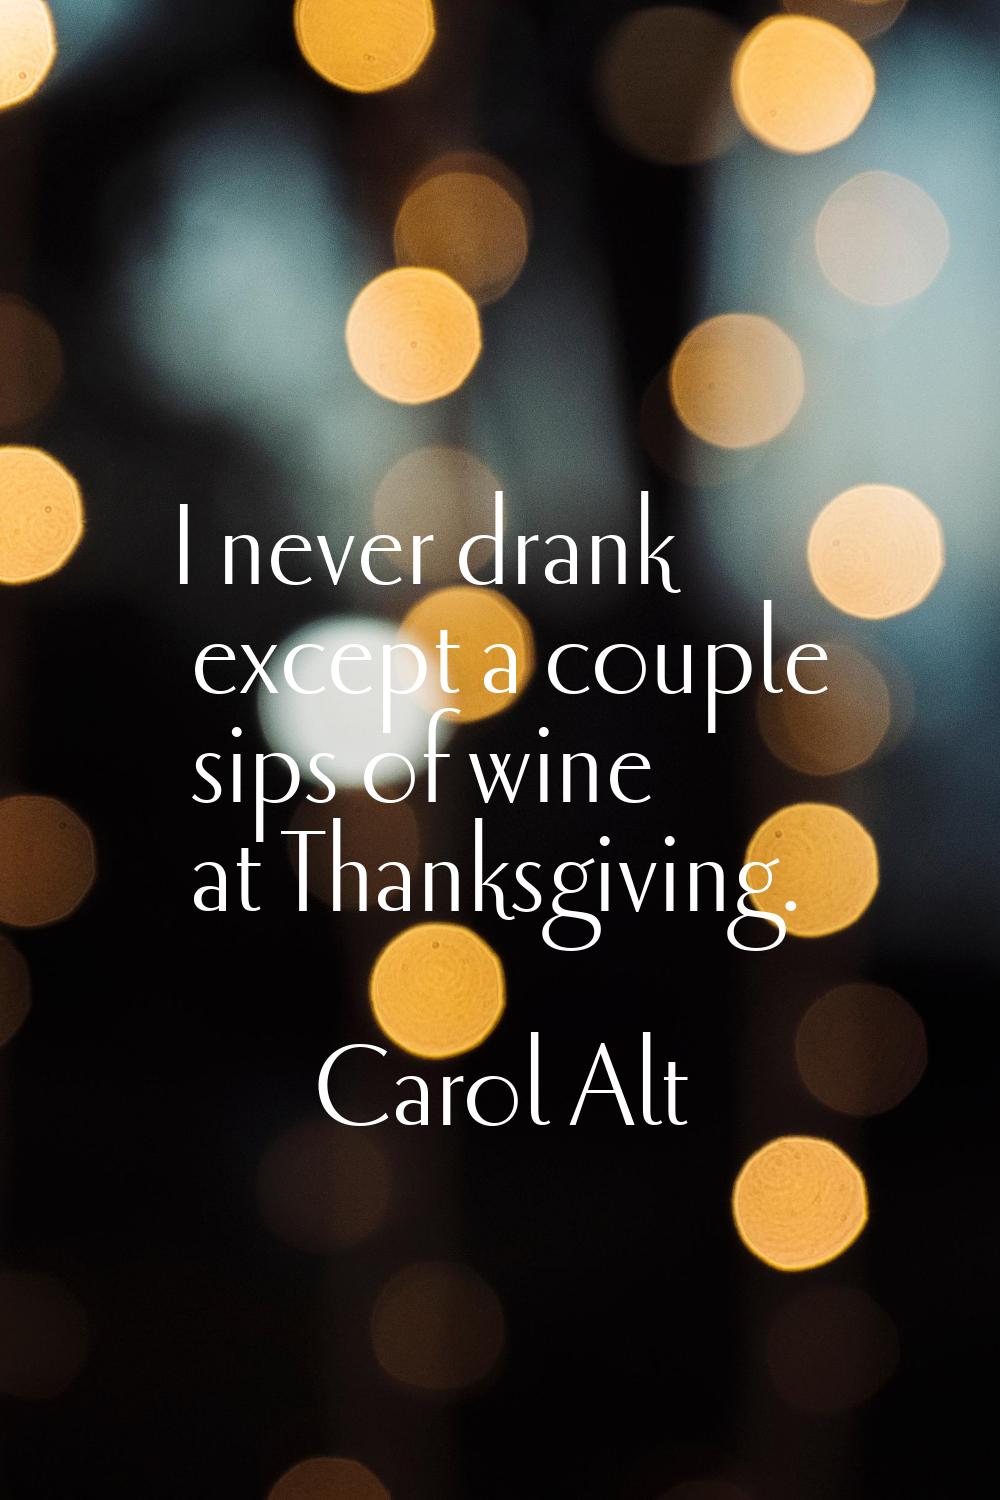 I never drank except a couple sips of wine at Thanksgiving.